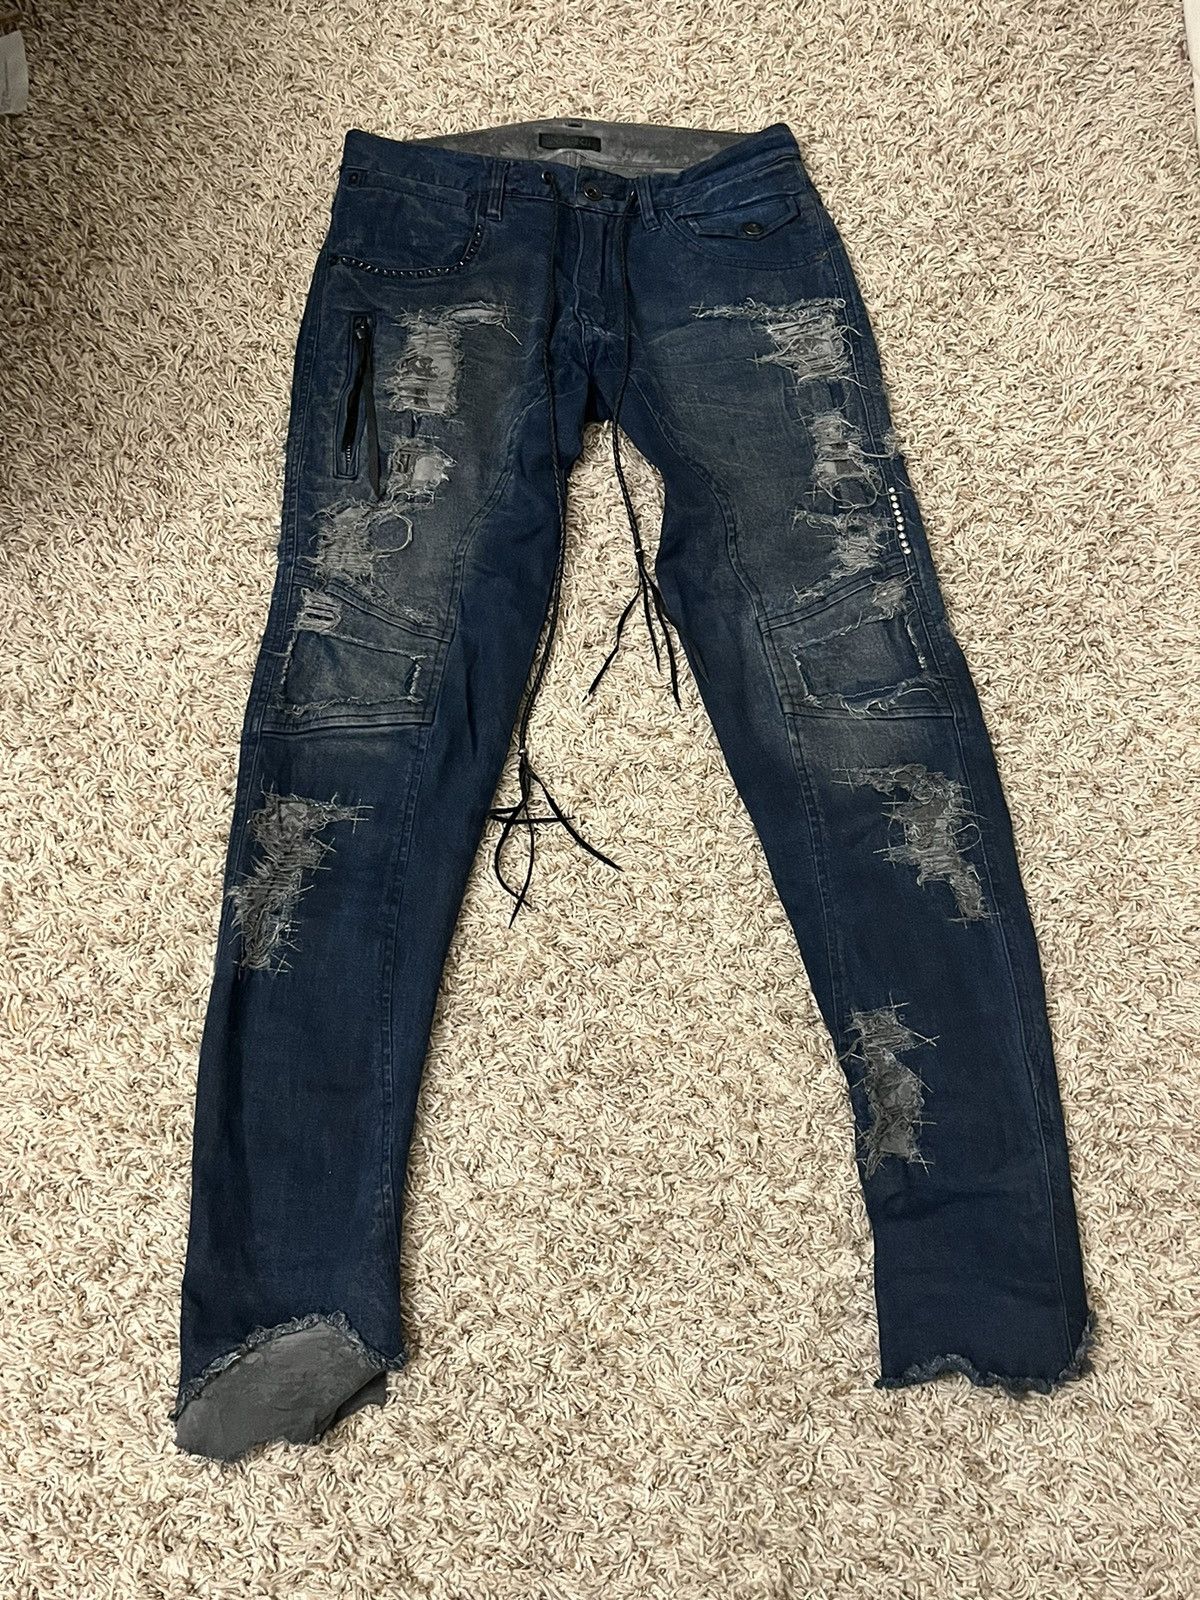 Japanese Brand KMRii jeans | Grailed